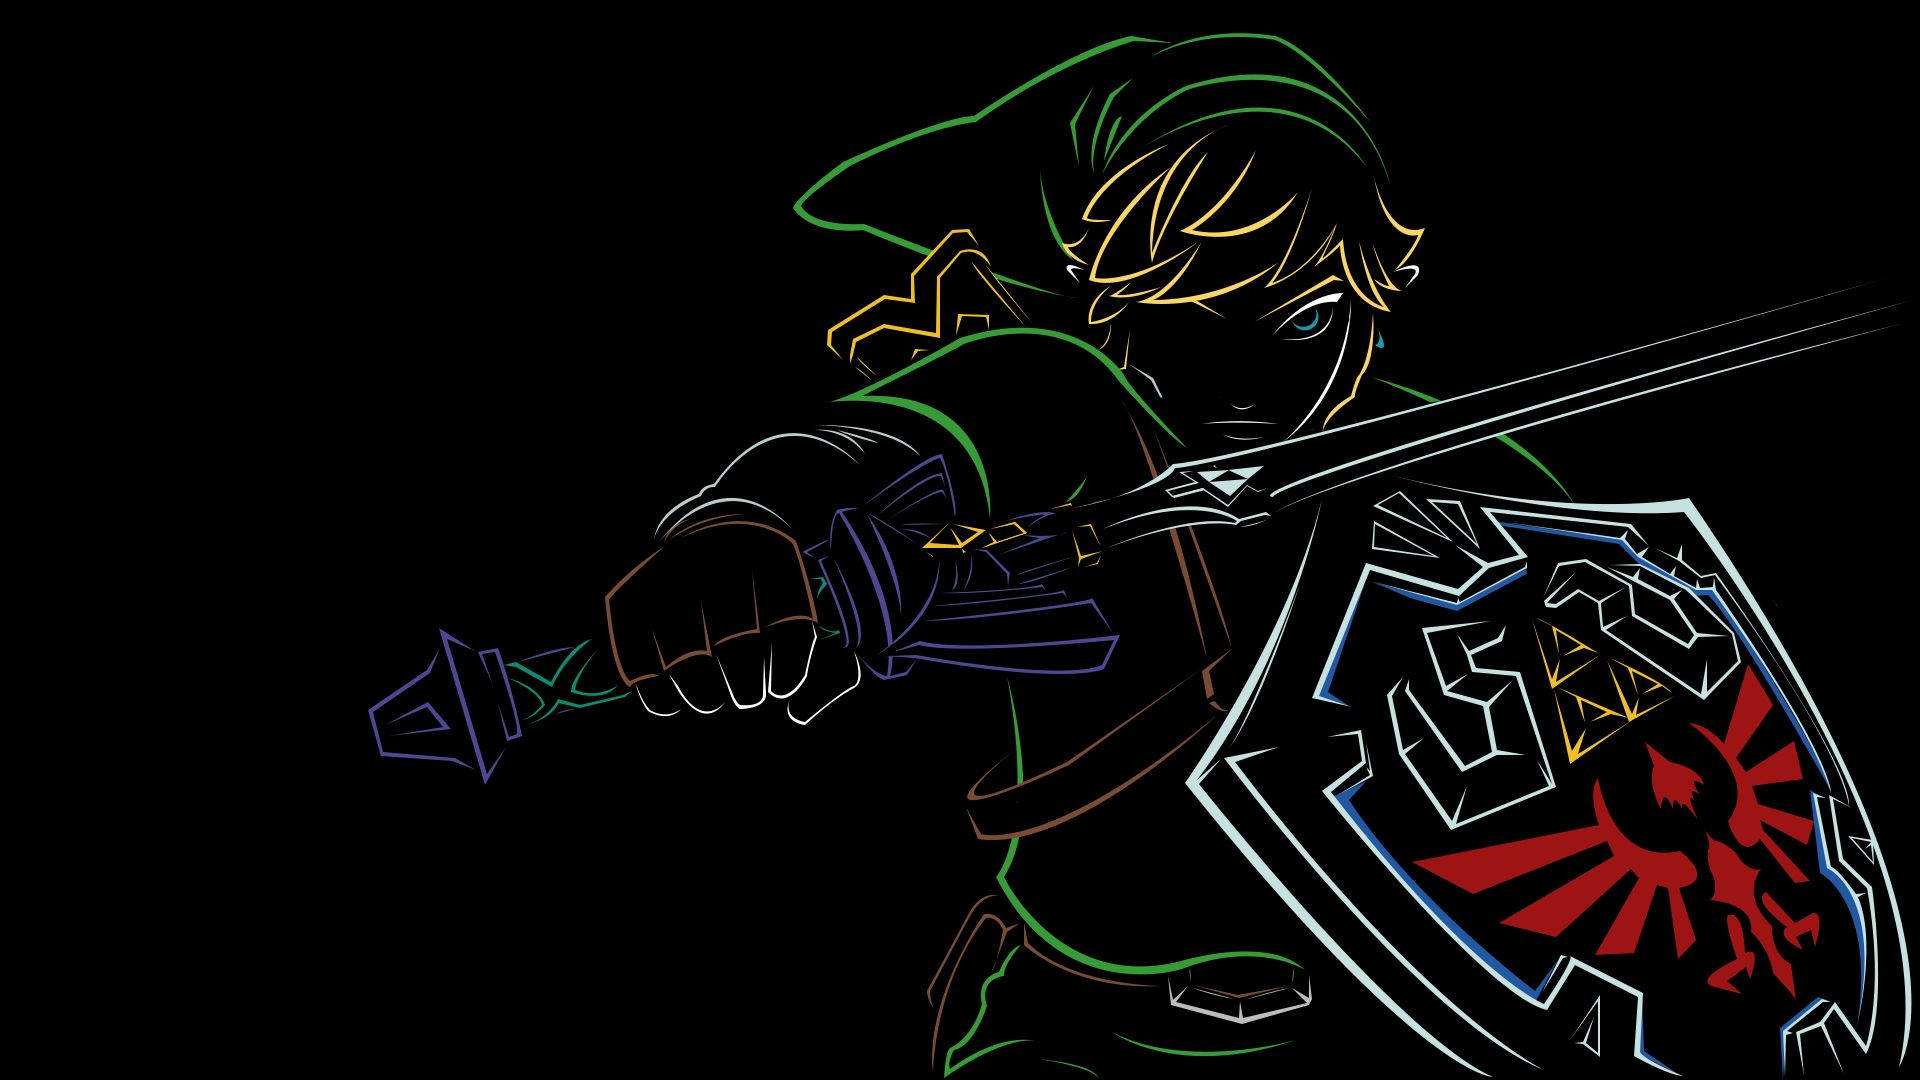 "Link takes on an epic adventure in The Legend of Zelda series." Wallpaper